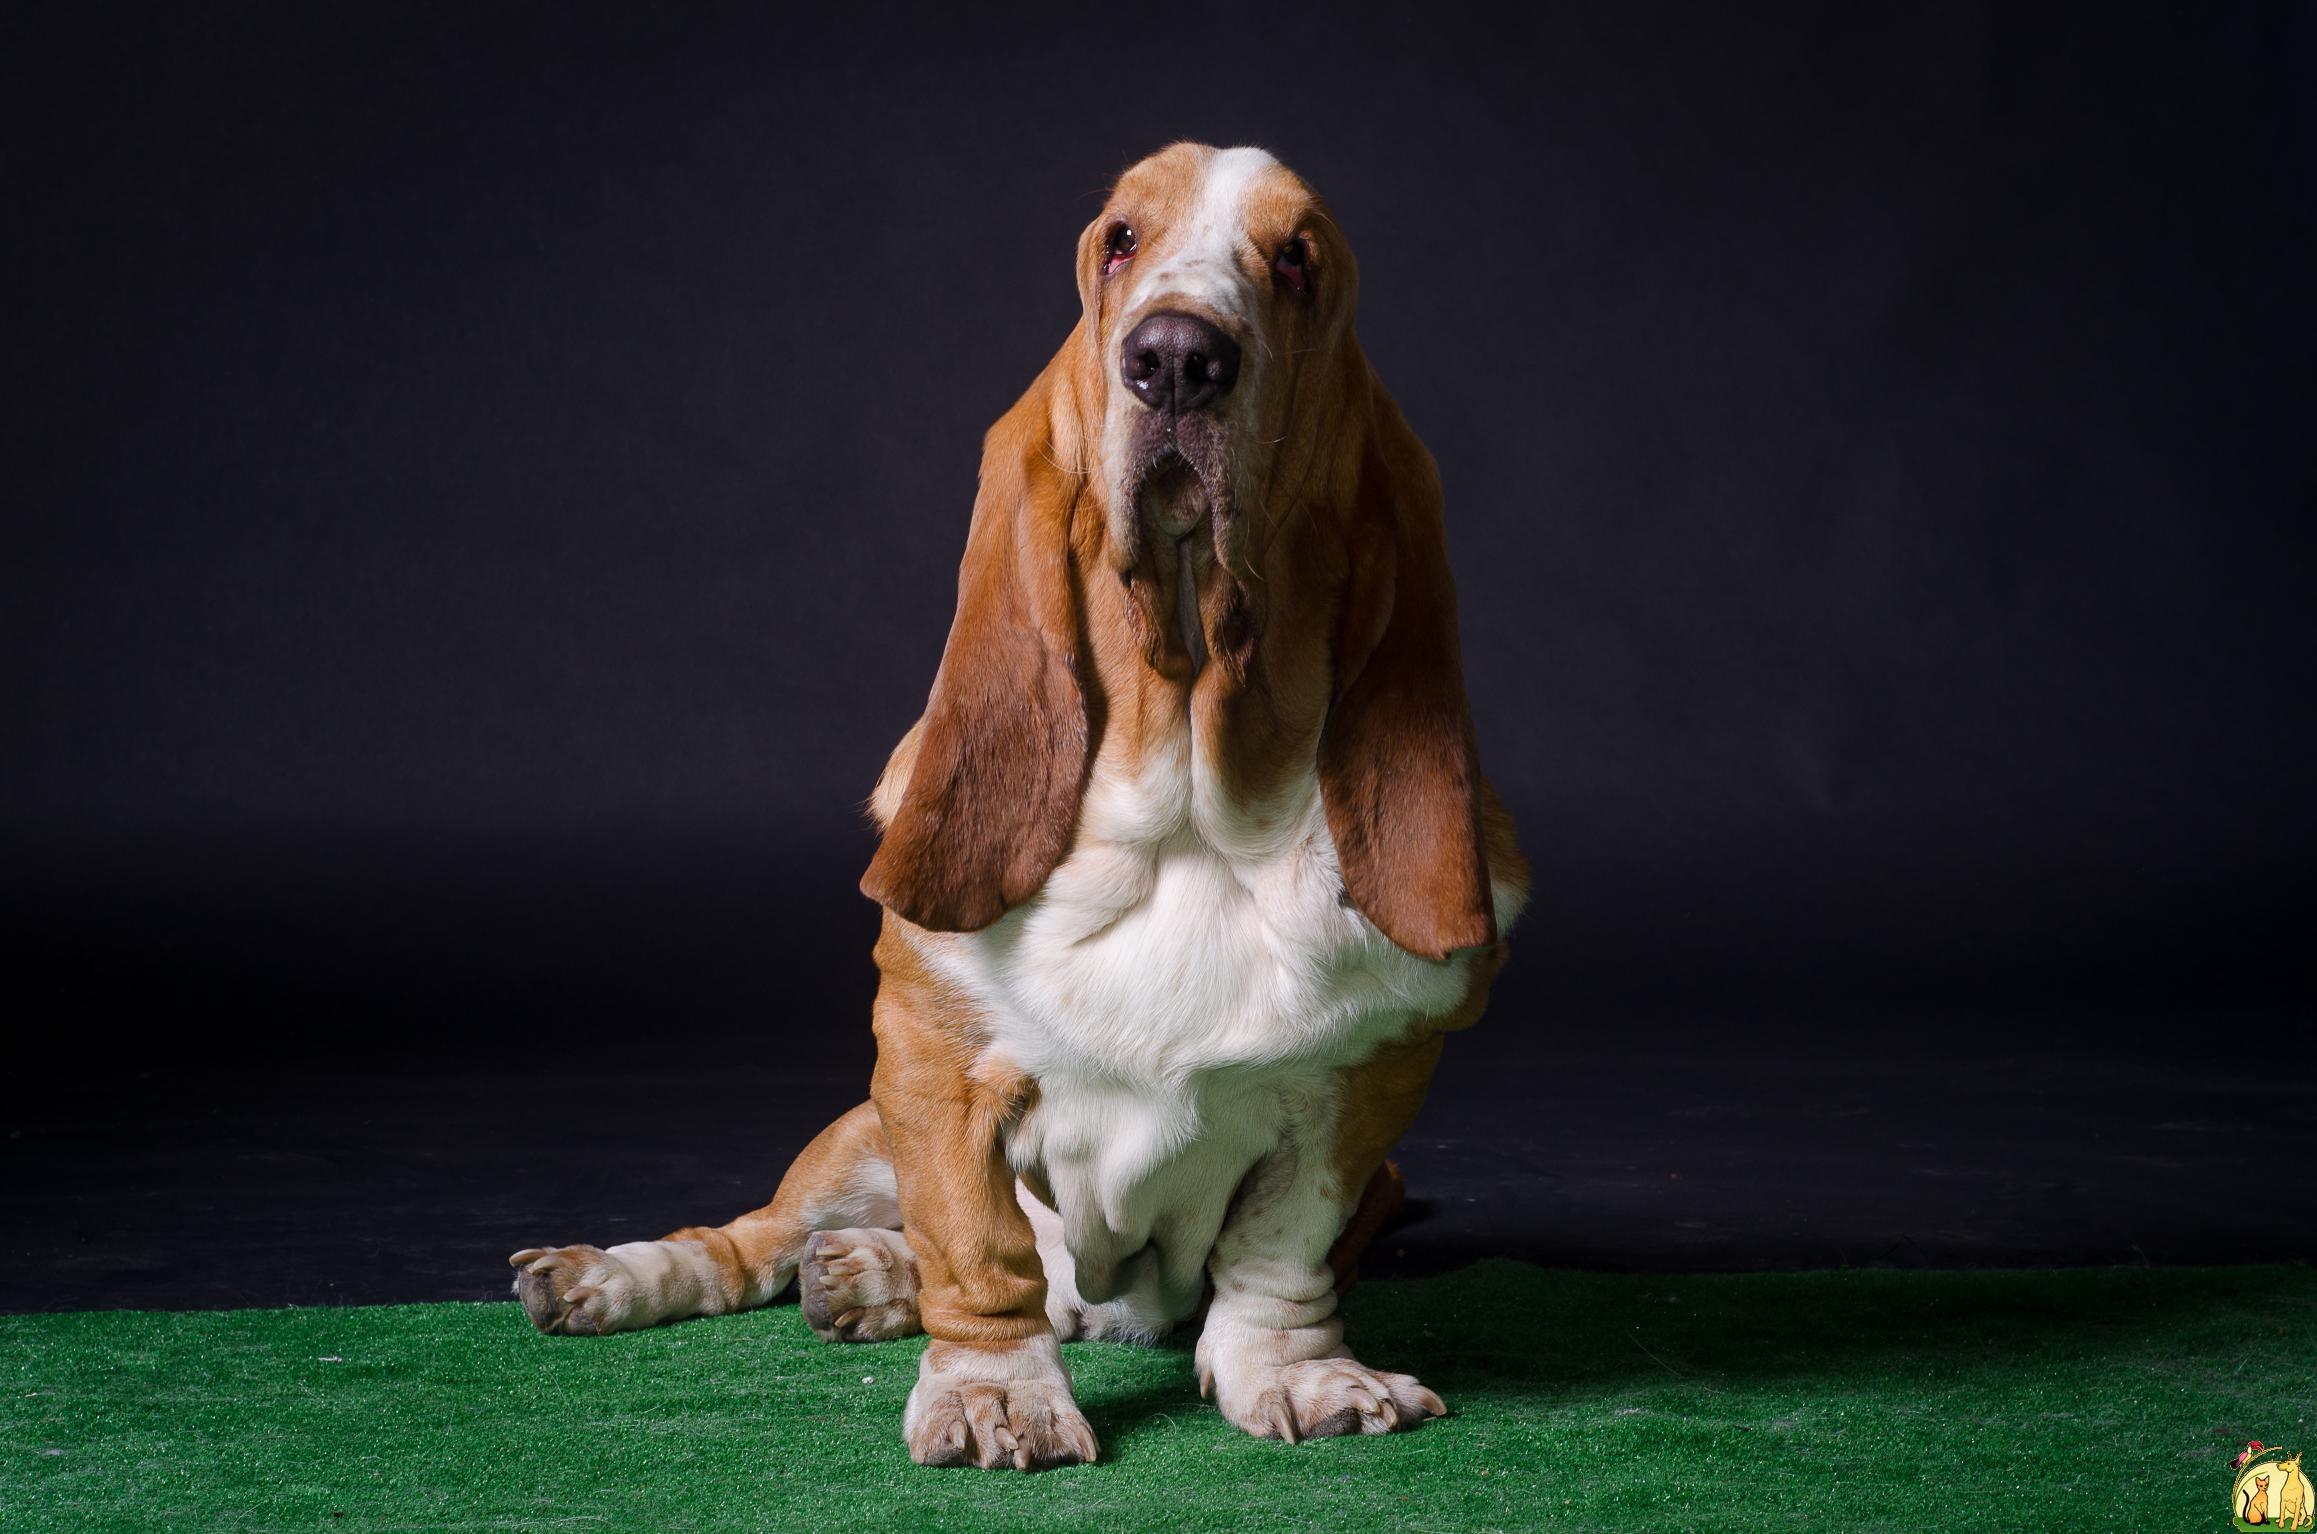 Adult basset hound posing on a dark background wallpapers and ...